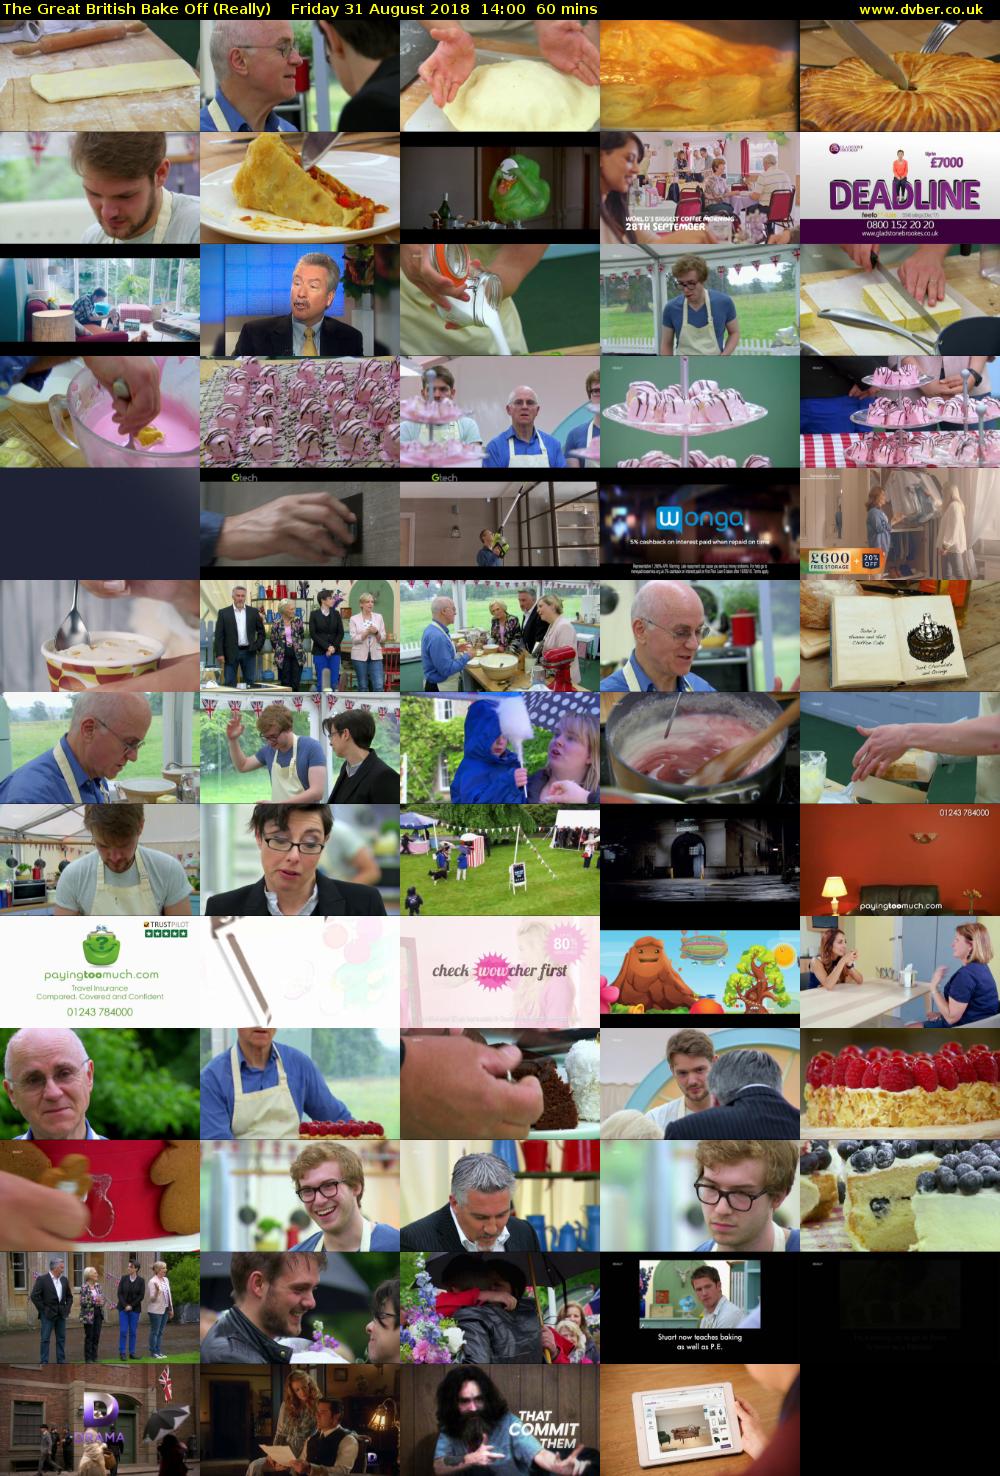 The Great British Bake Off (Really) Friday 31 August 2018 14:00 - 15:00